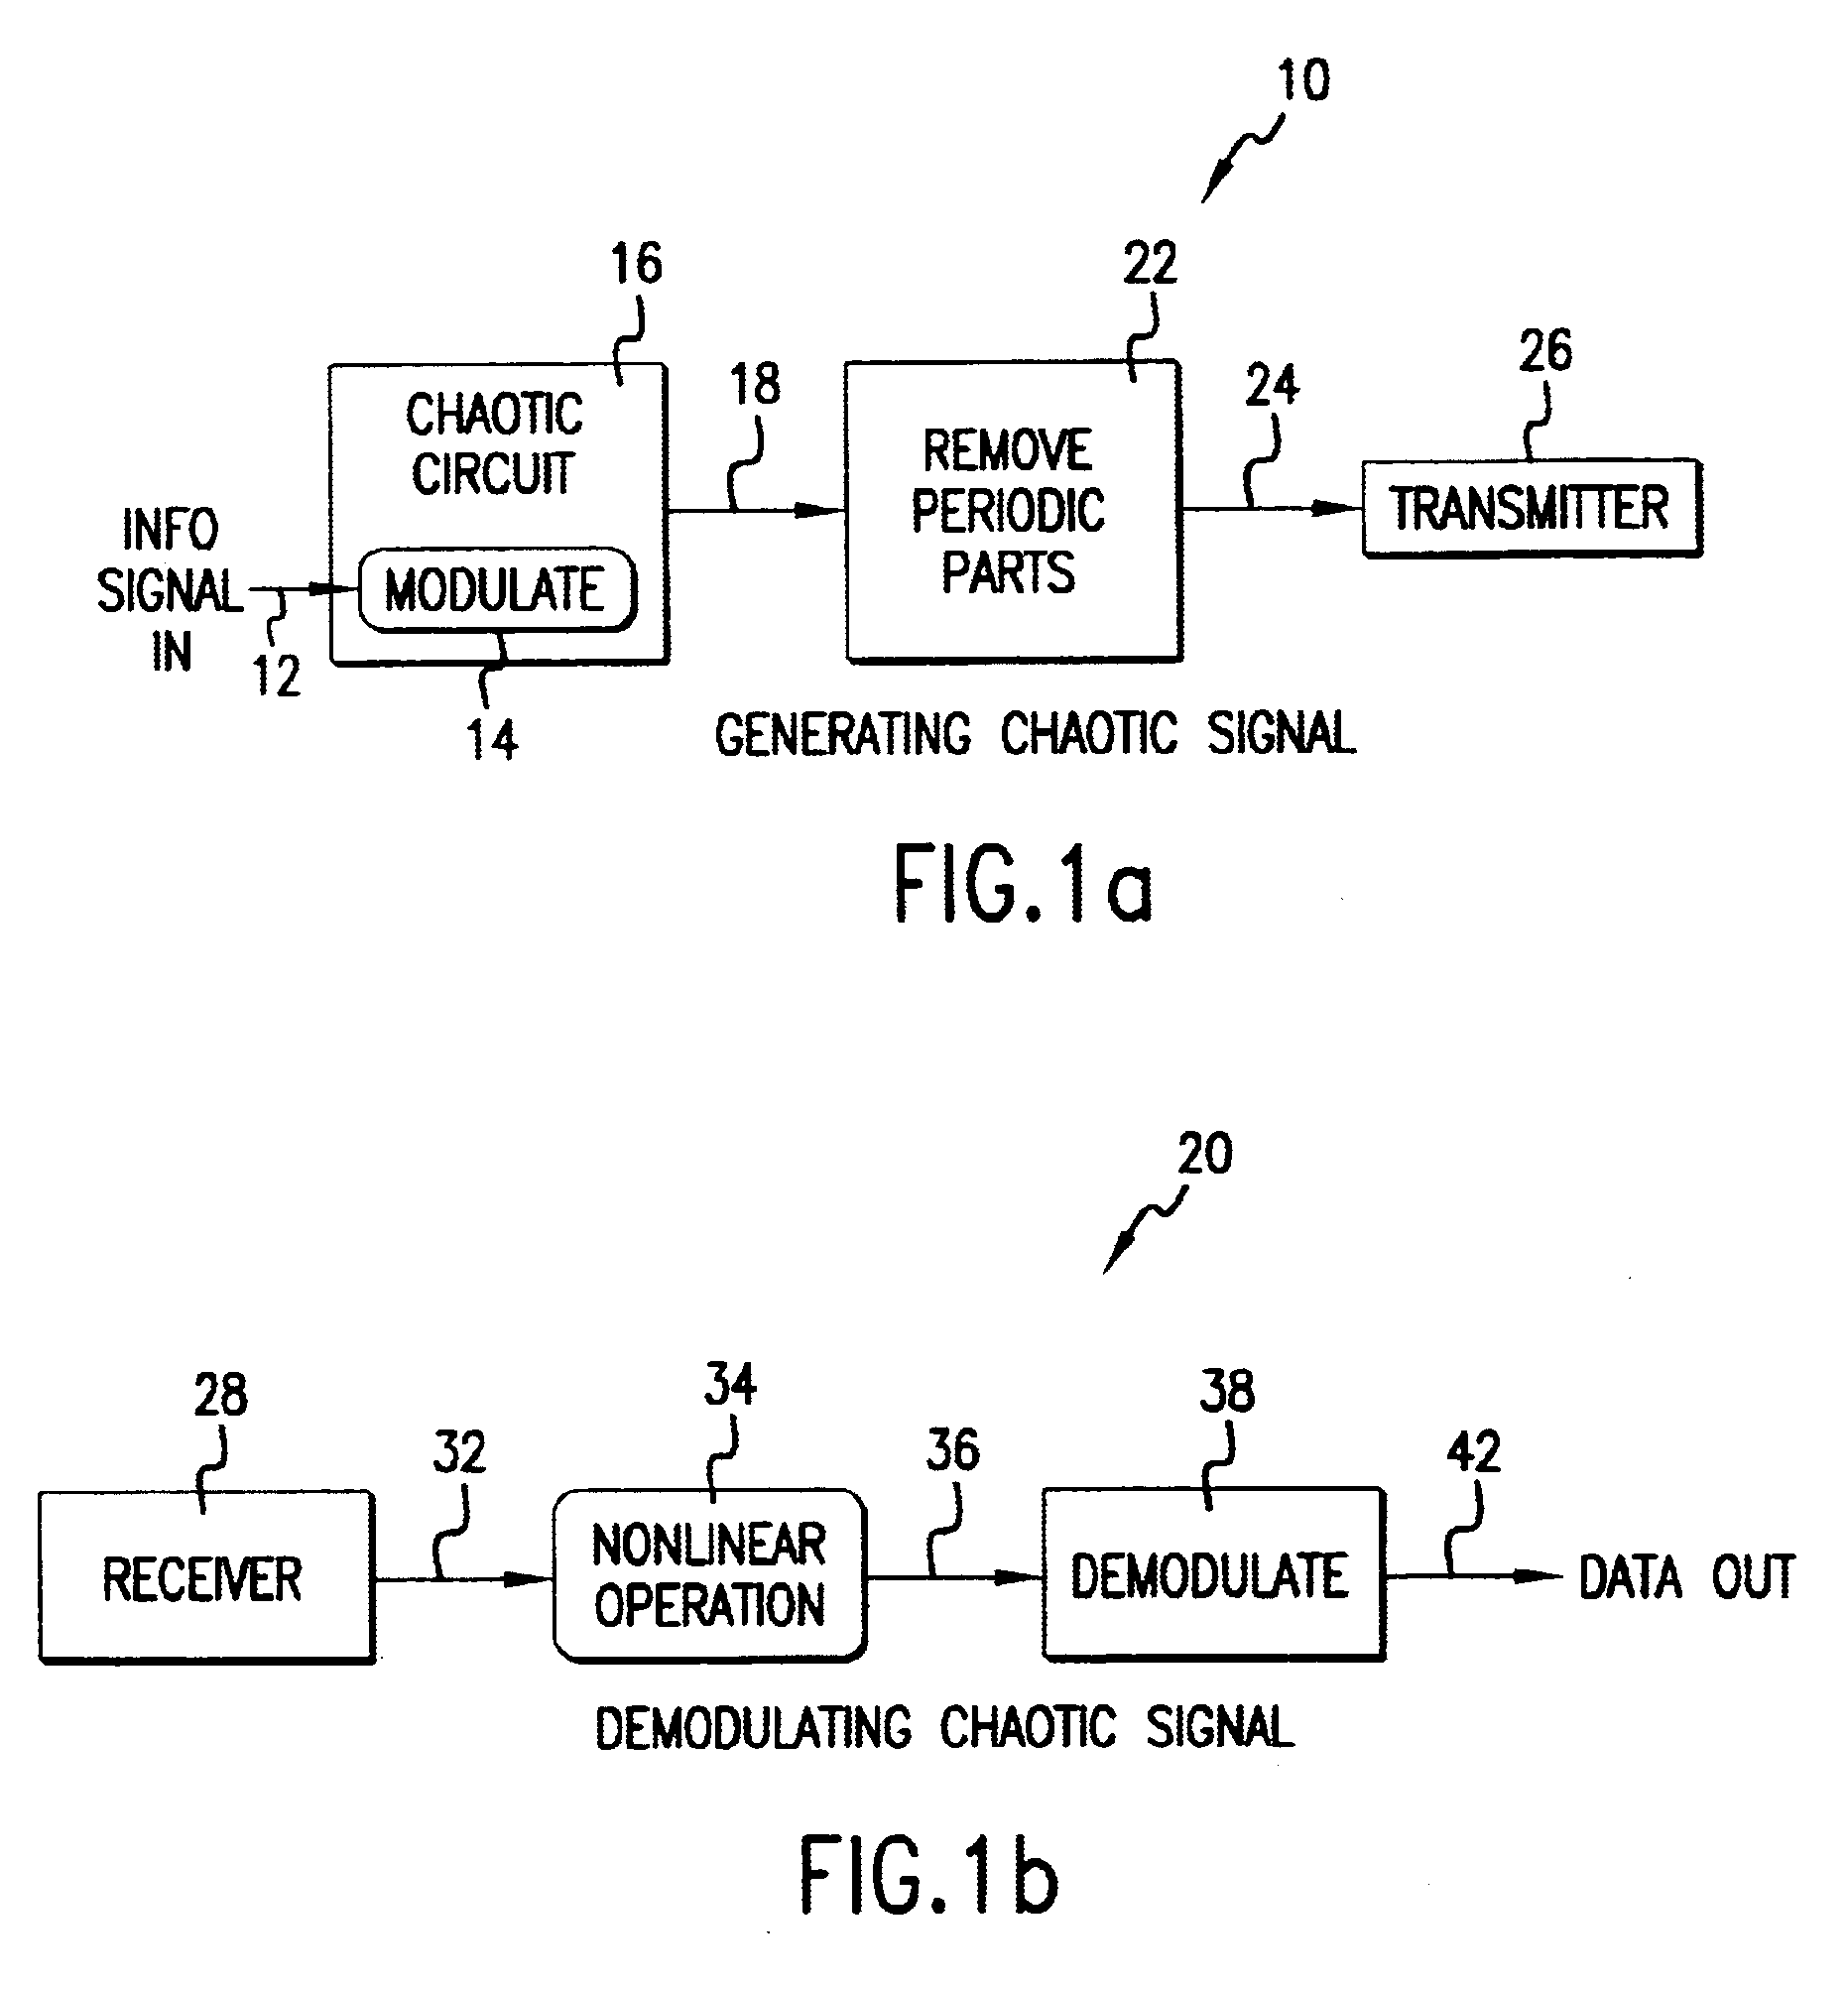 Low-interference communications device using chaotic signals